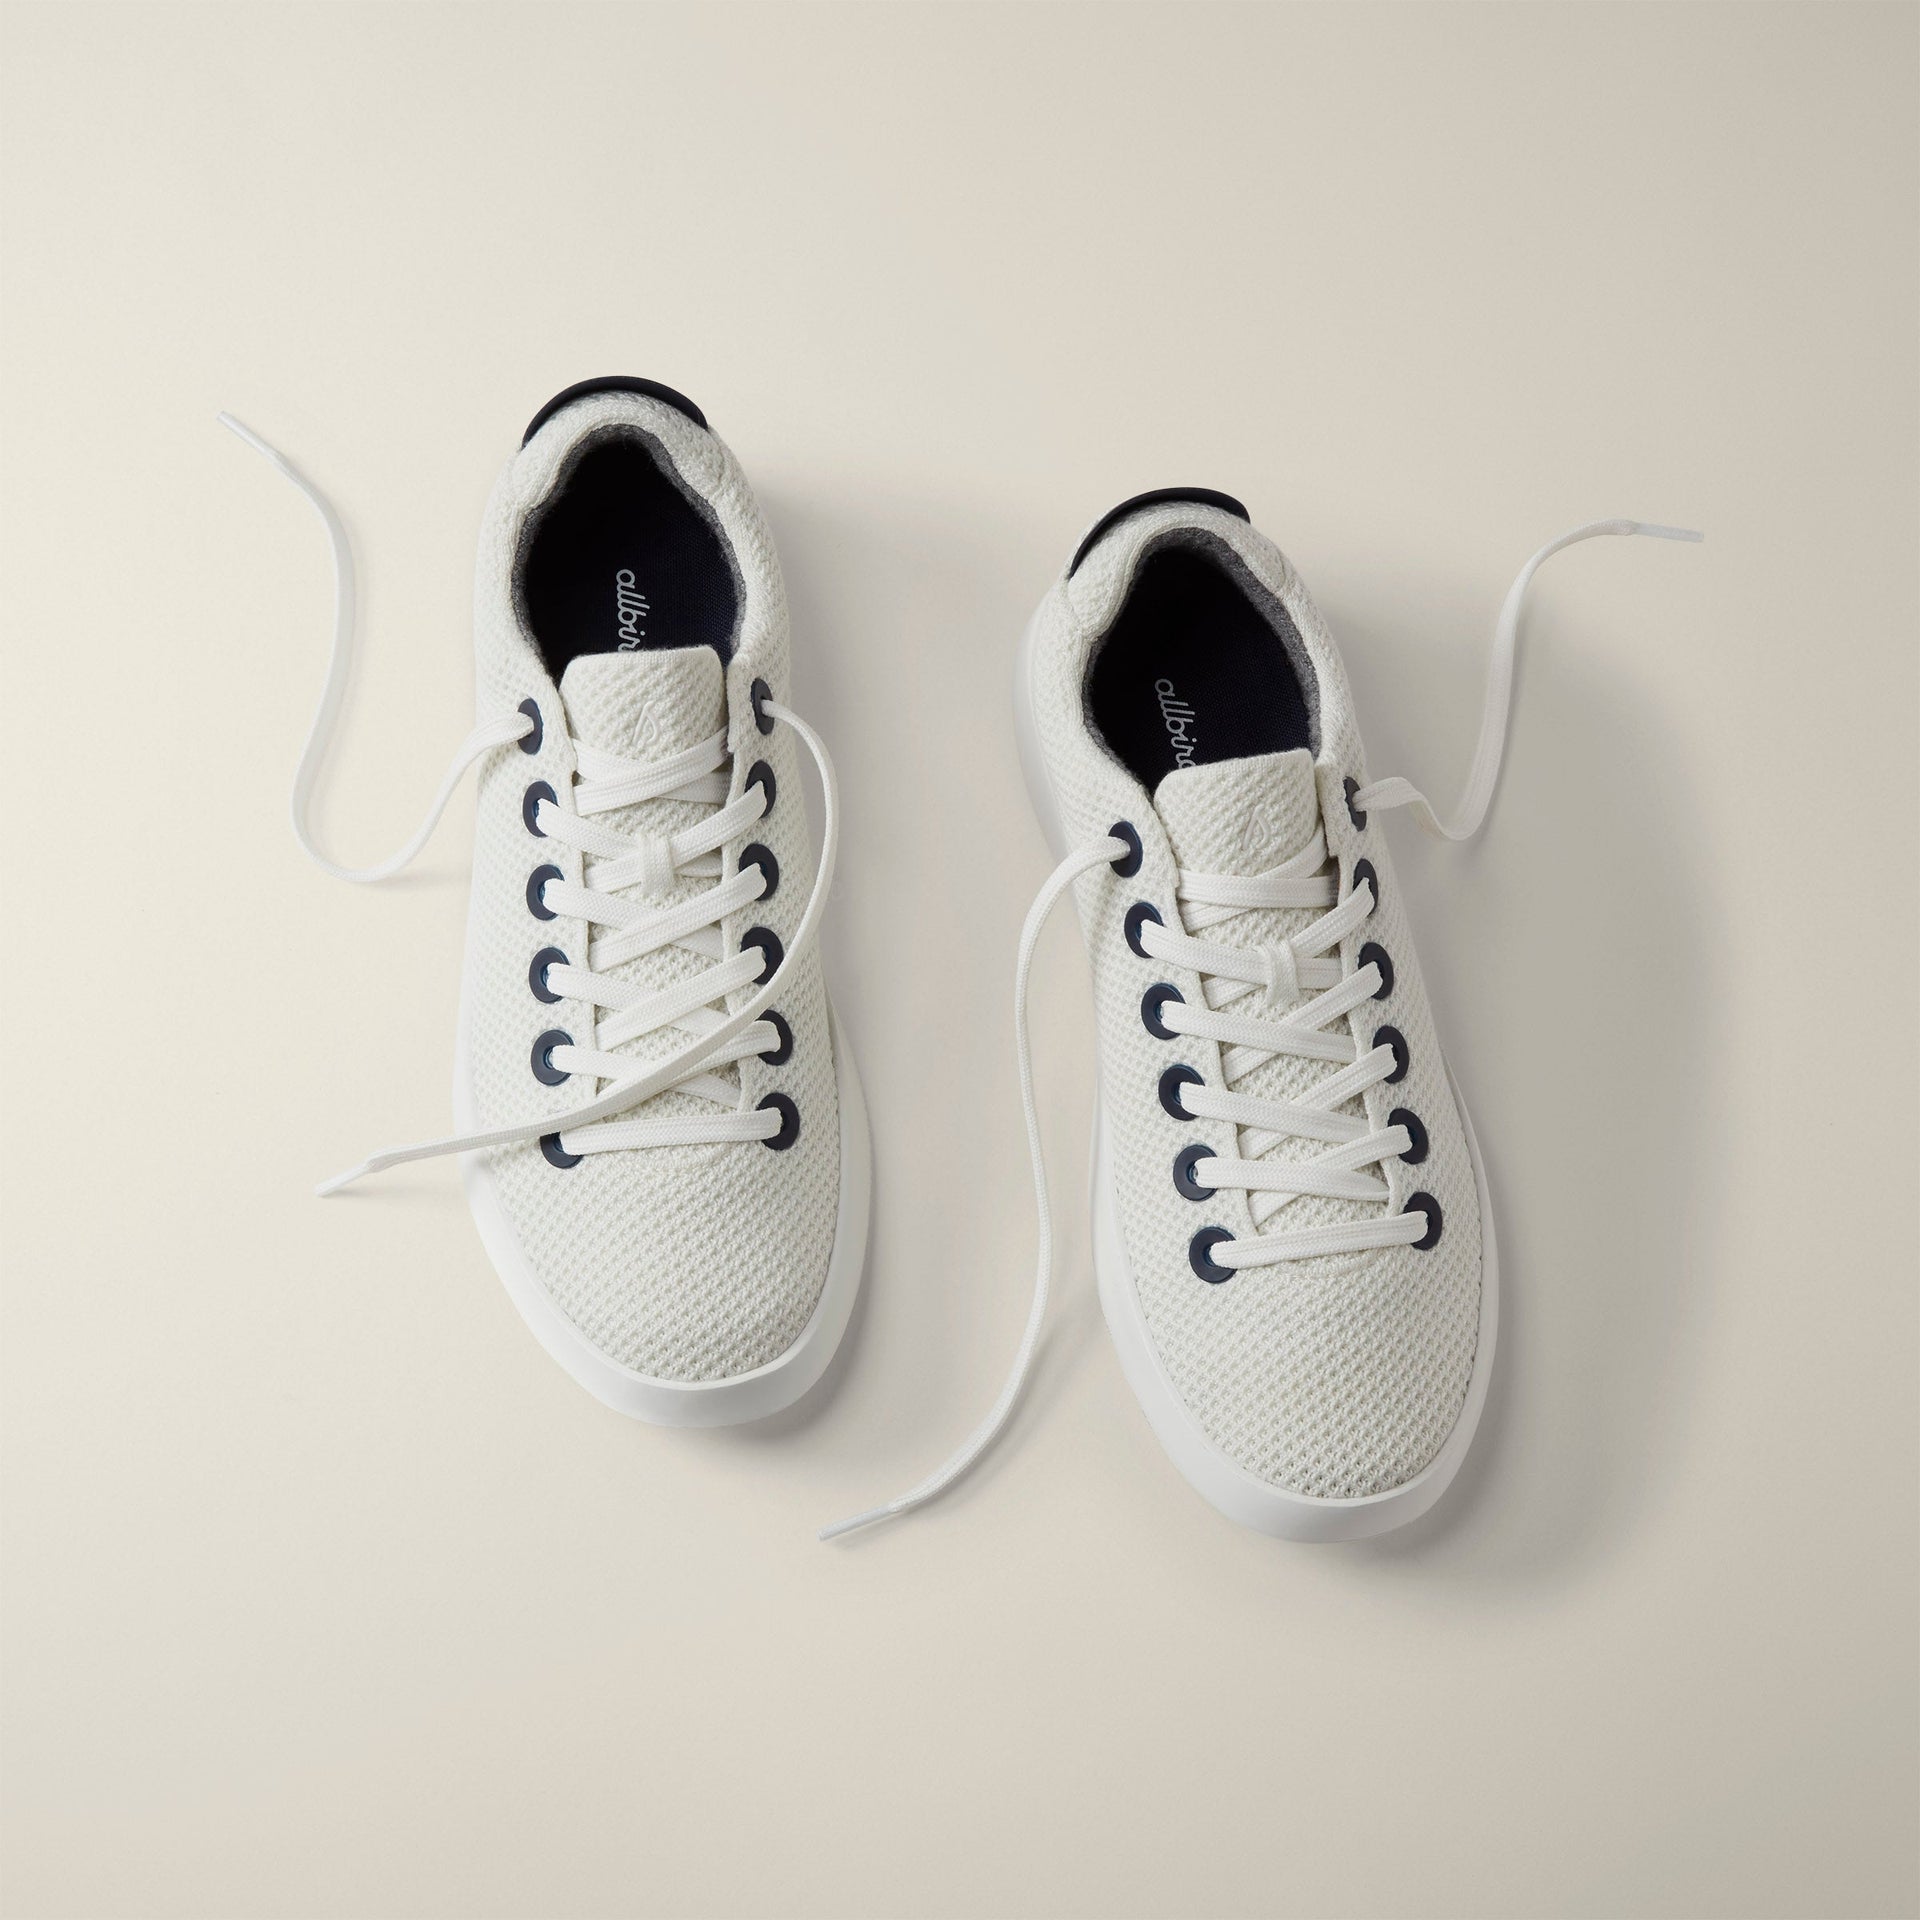 Men's Tree Pipers - Natural White / True Navy